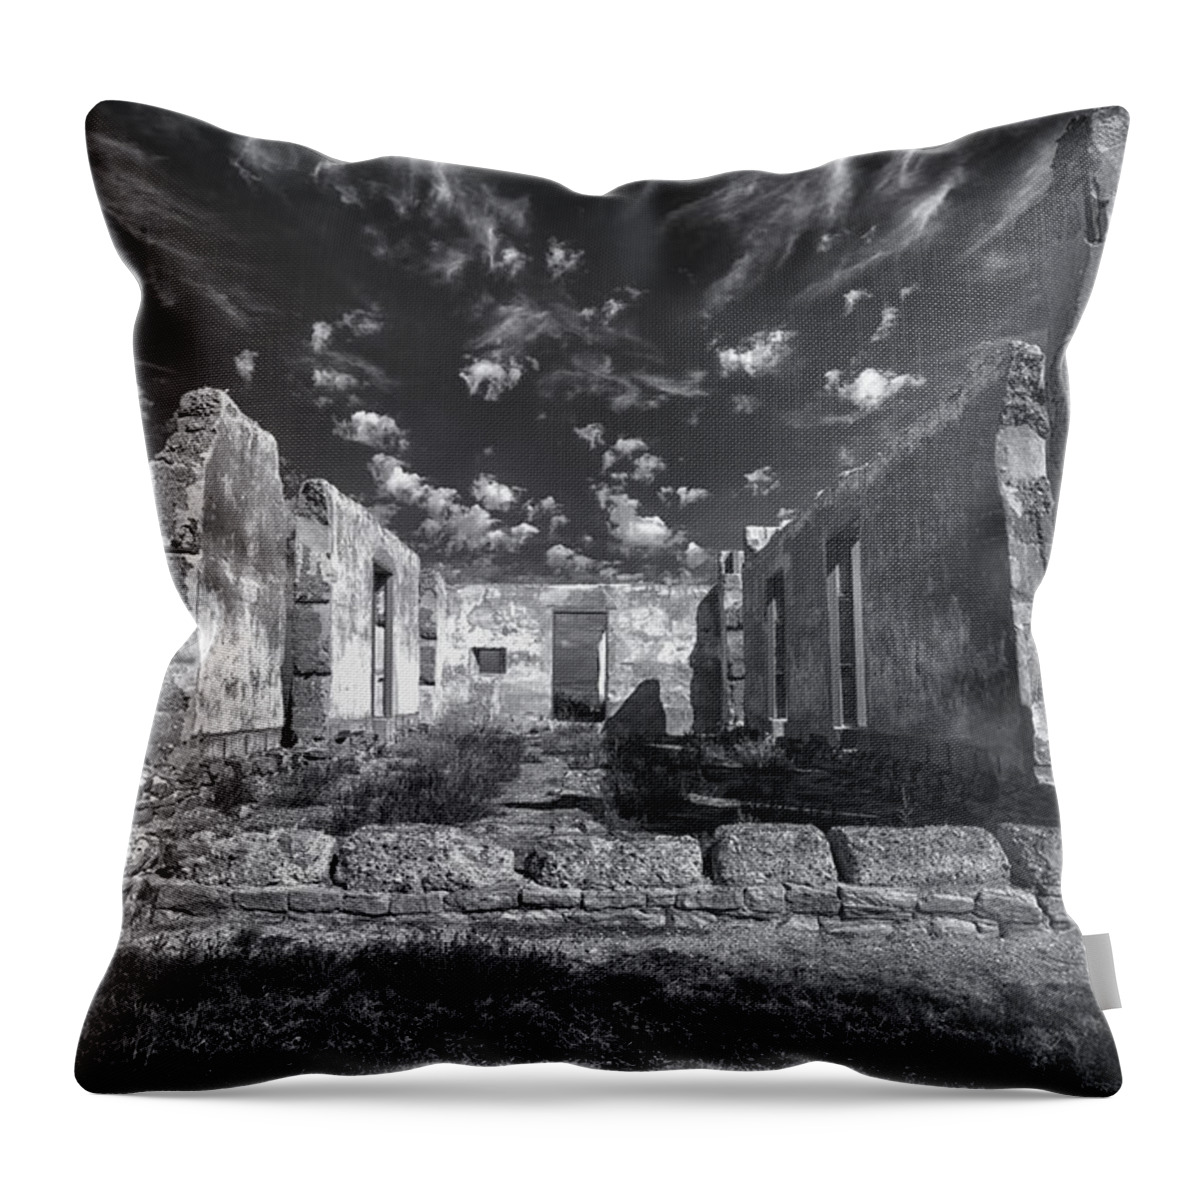 Crystal Yingling Throw Pillow featuring the photograph Fort Laramie by Ghostwinds Photography